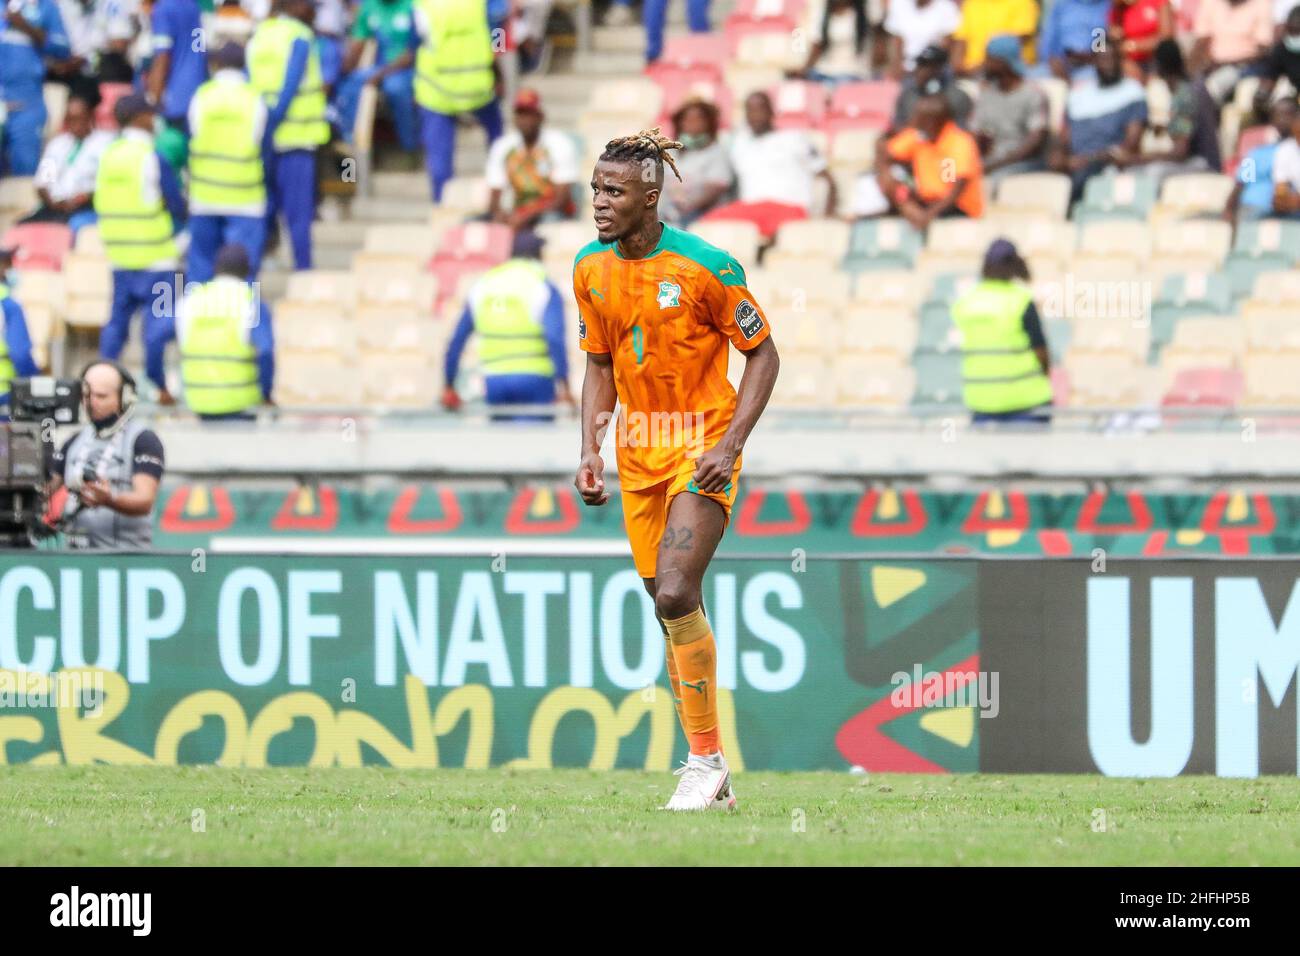 Douala, CAMEROON - JANUARY 16: Wilfried Zaha of Ivory Coast during the Africa Cup of Nations group E match between Ivory Coast and Sierra Leone at Stade de Japoma on January 16 2022 in Douala, Cameroon. (Photo by SF) Credit: Sebo47/Alamy Live News Stock Photo